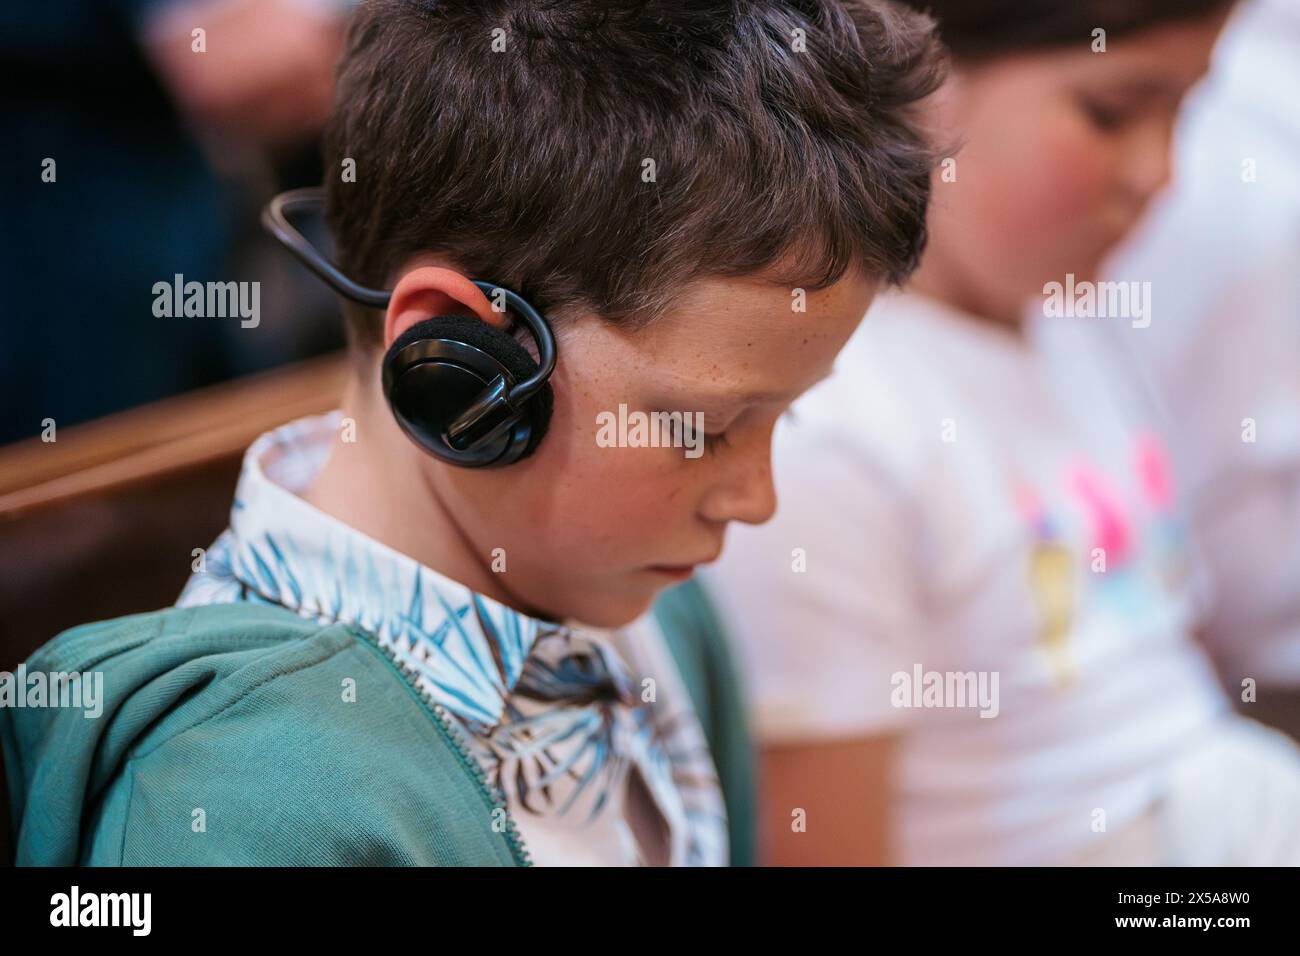 A young boy wearing a stylish bow tie and headphones is focused in a summer classroom atmosphere, with other children around him. Stock Photo